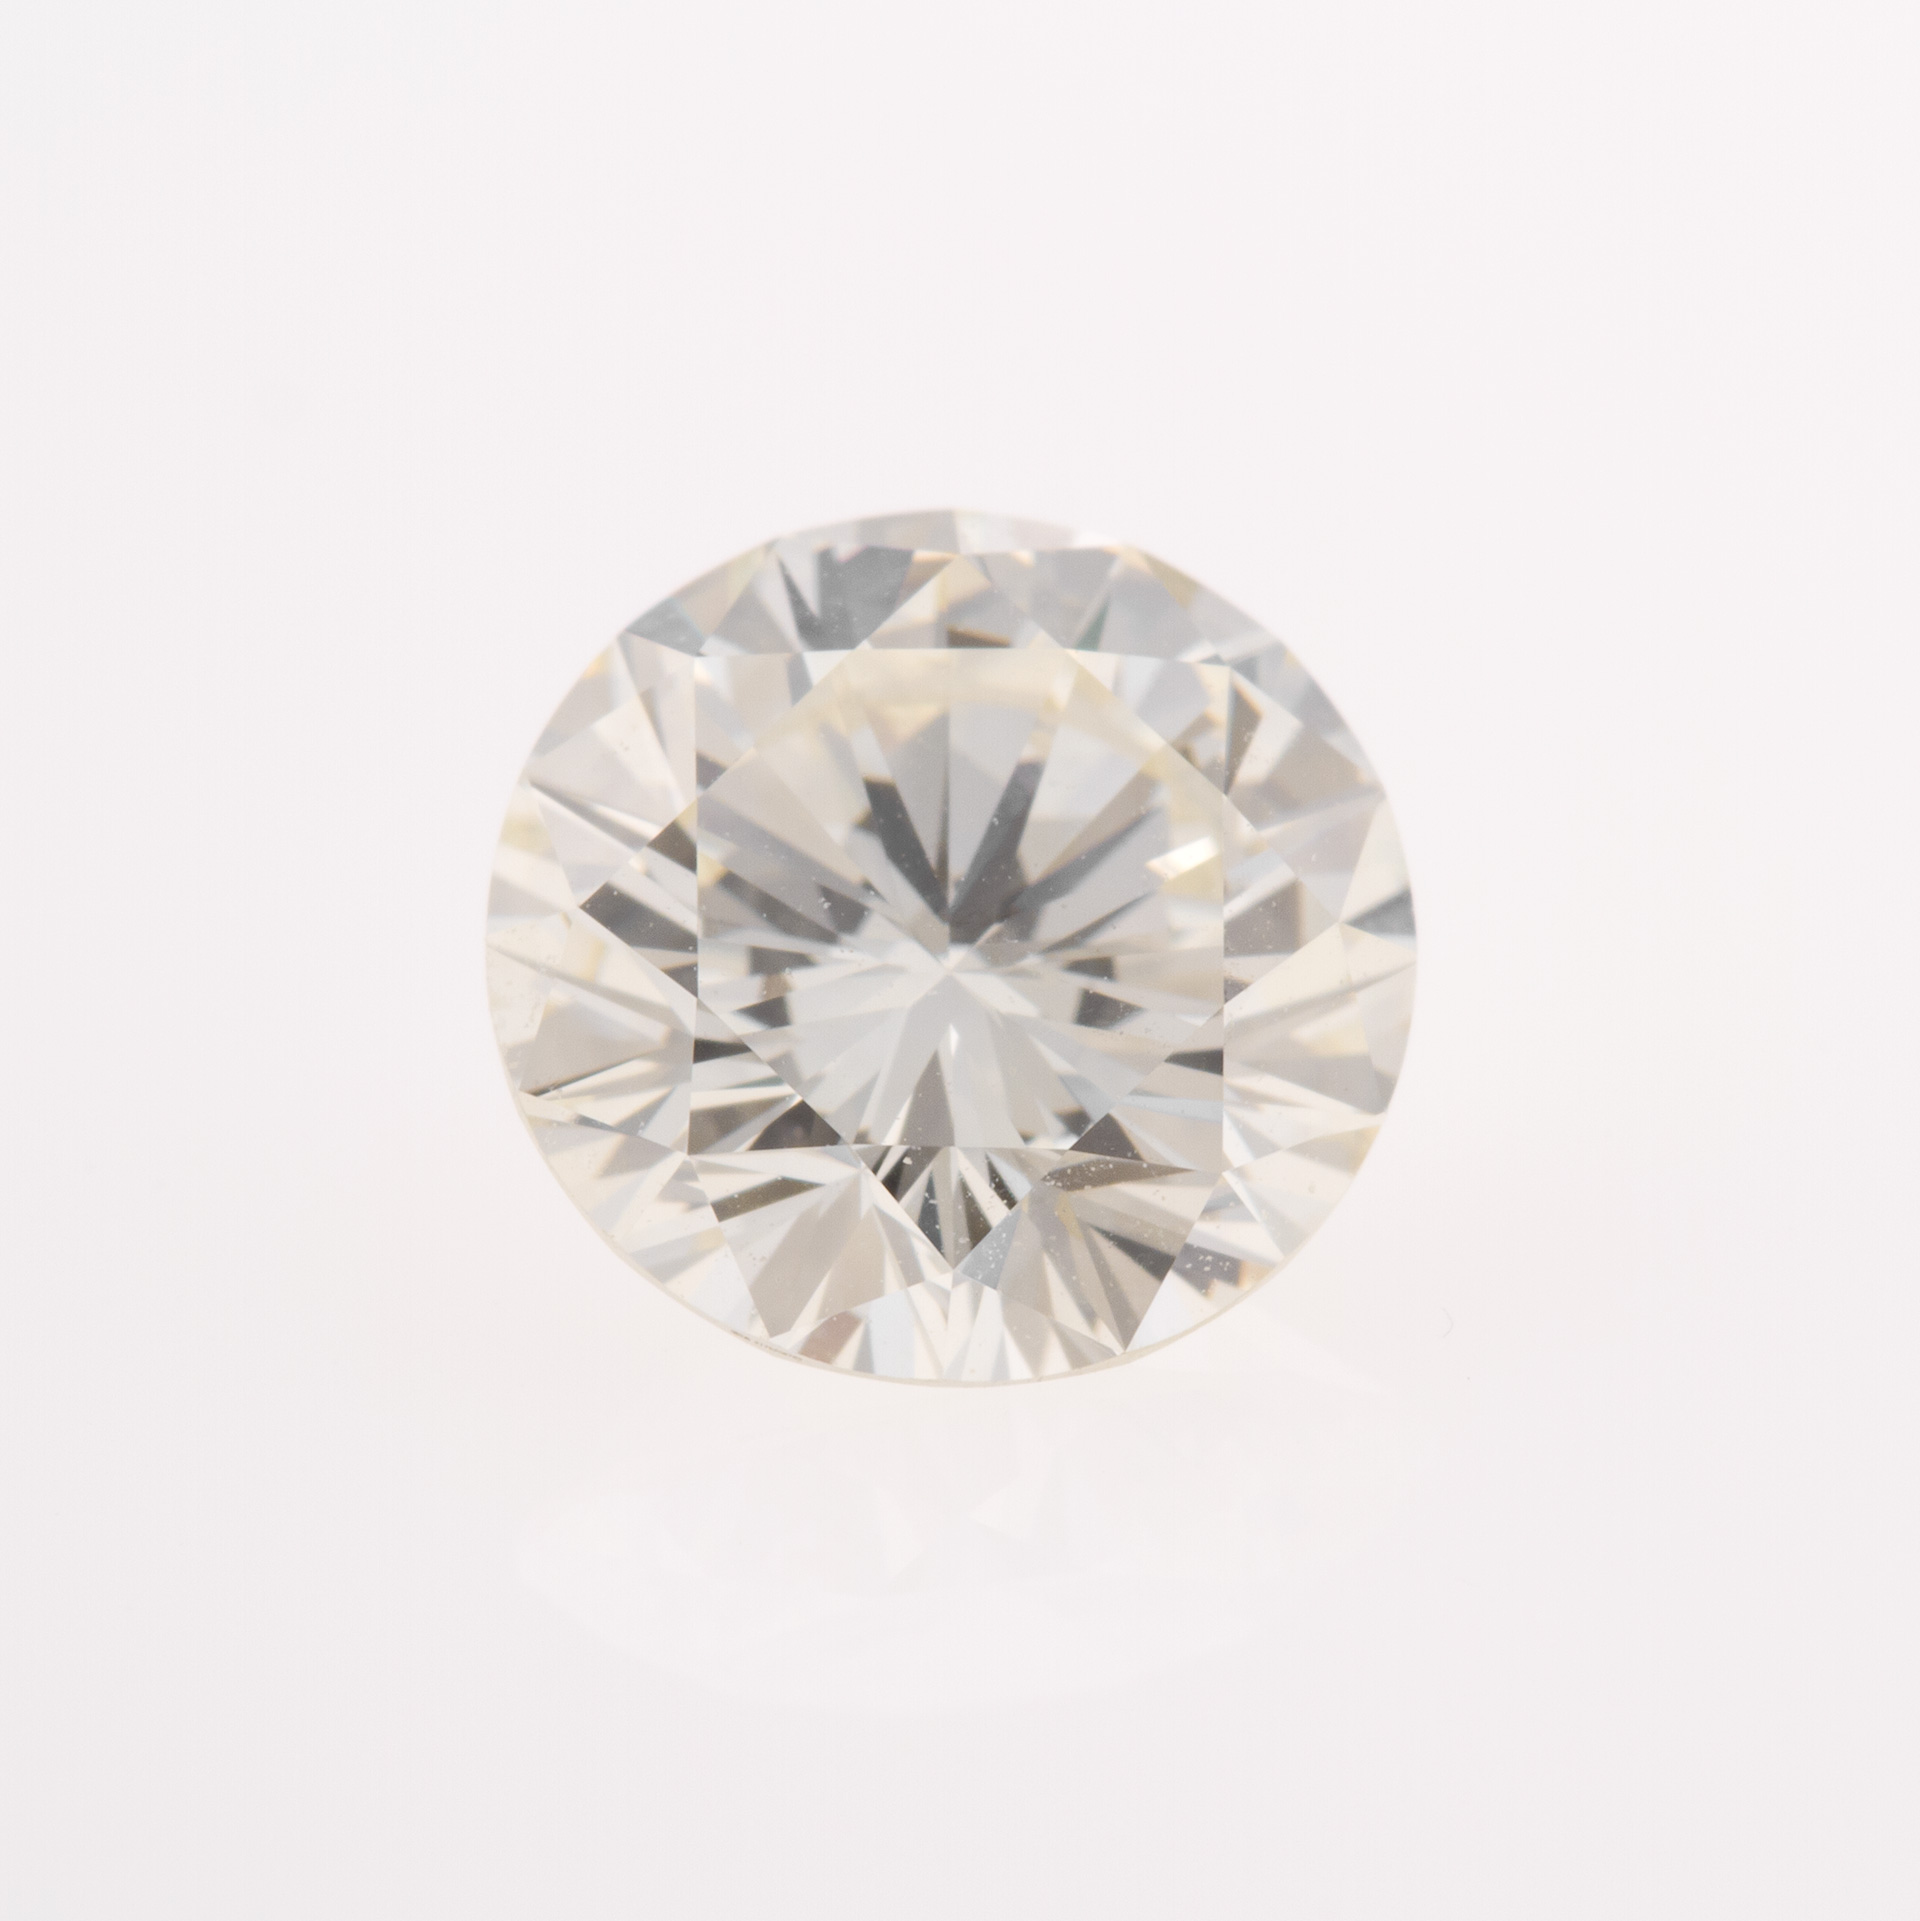 Gia Certified Round Diamond 2.19 Cts (L Color Vs2 Clarity) In A Platinum Setting With Diamonds image 4